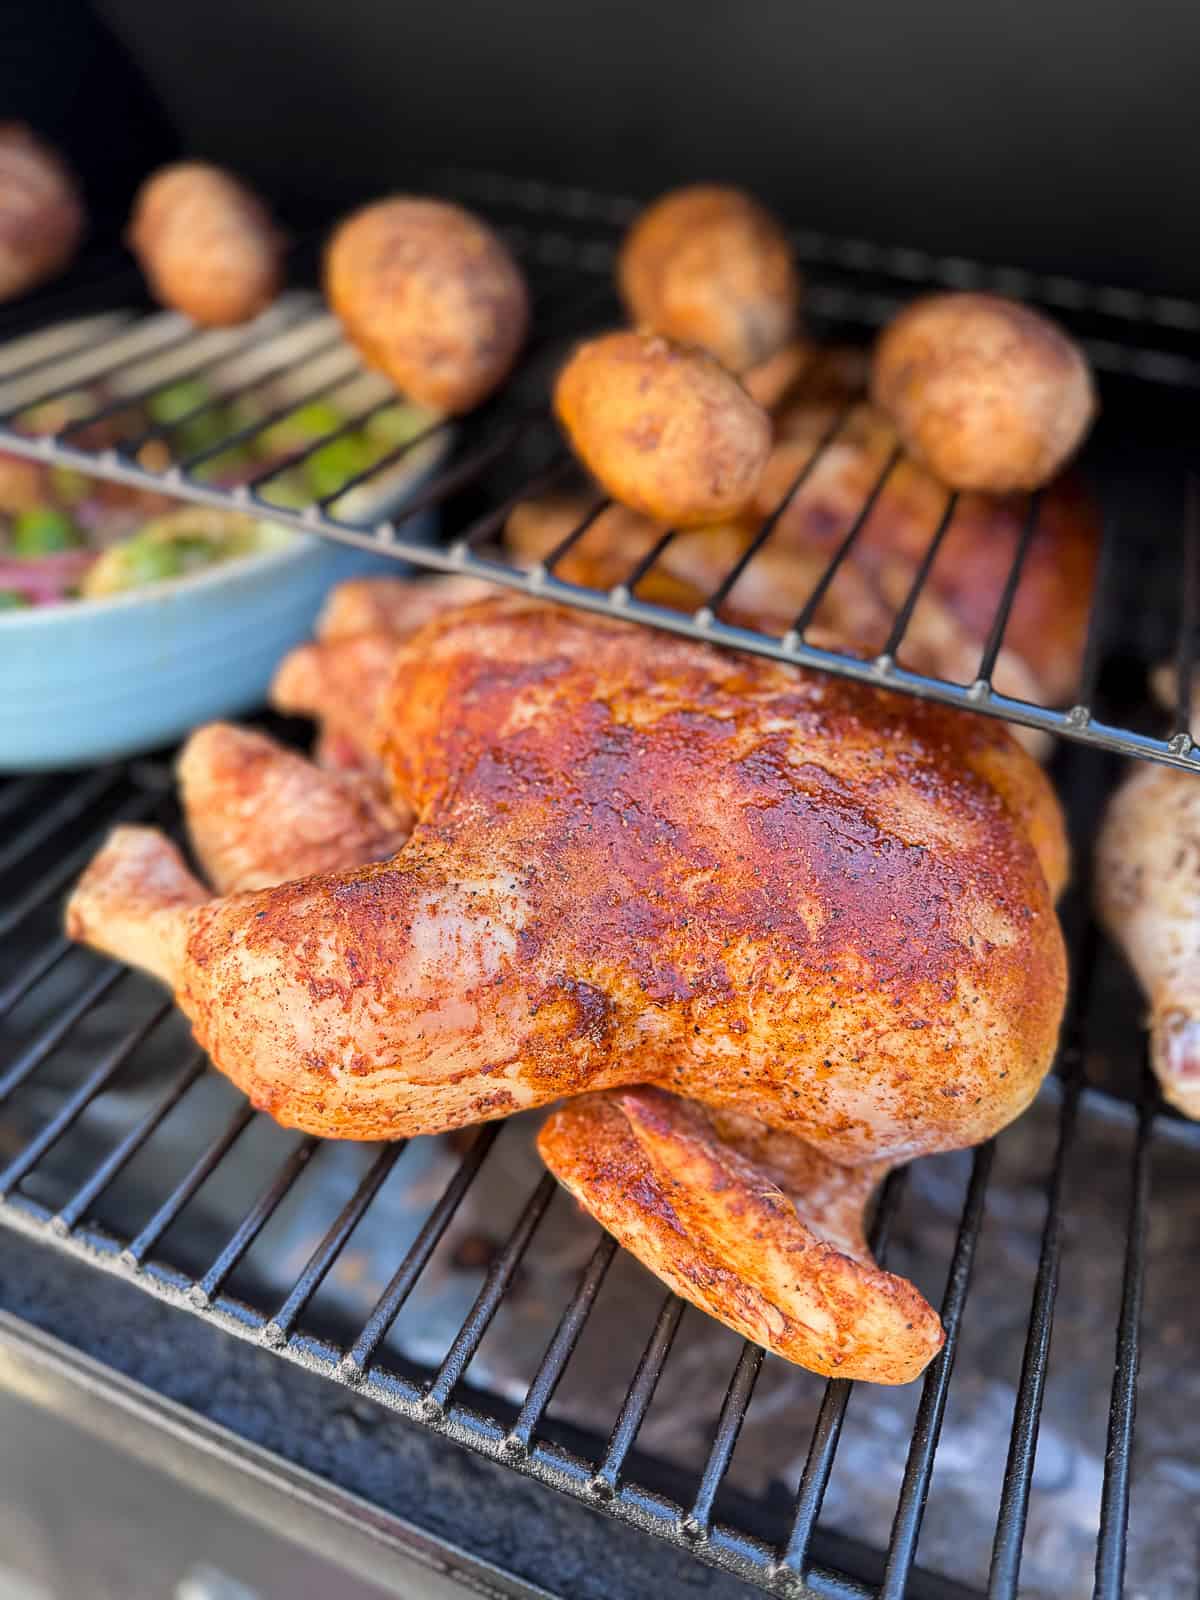 Smoking Chicken with Baked Potatoes in Traeger Pellet Grill